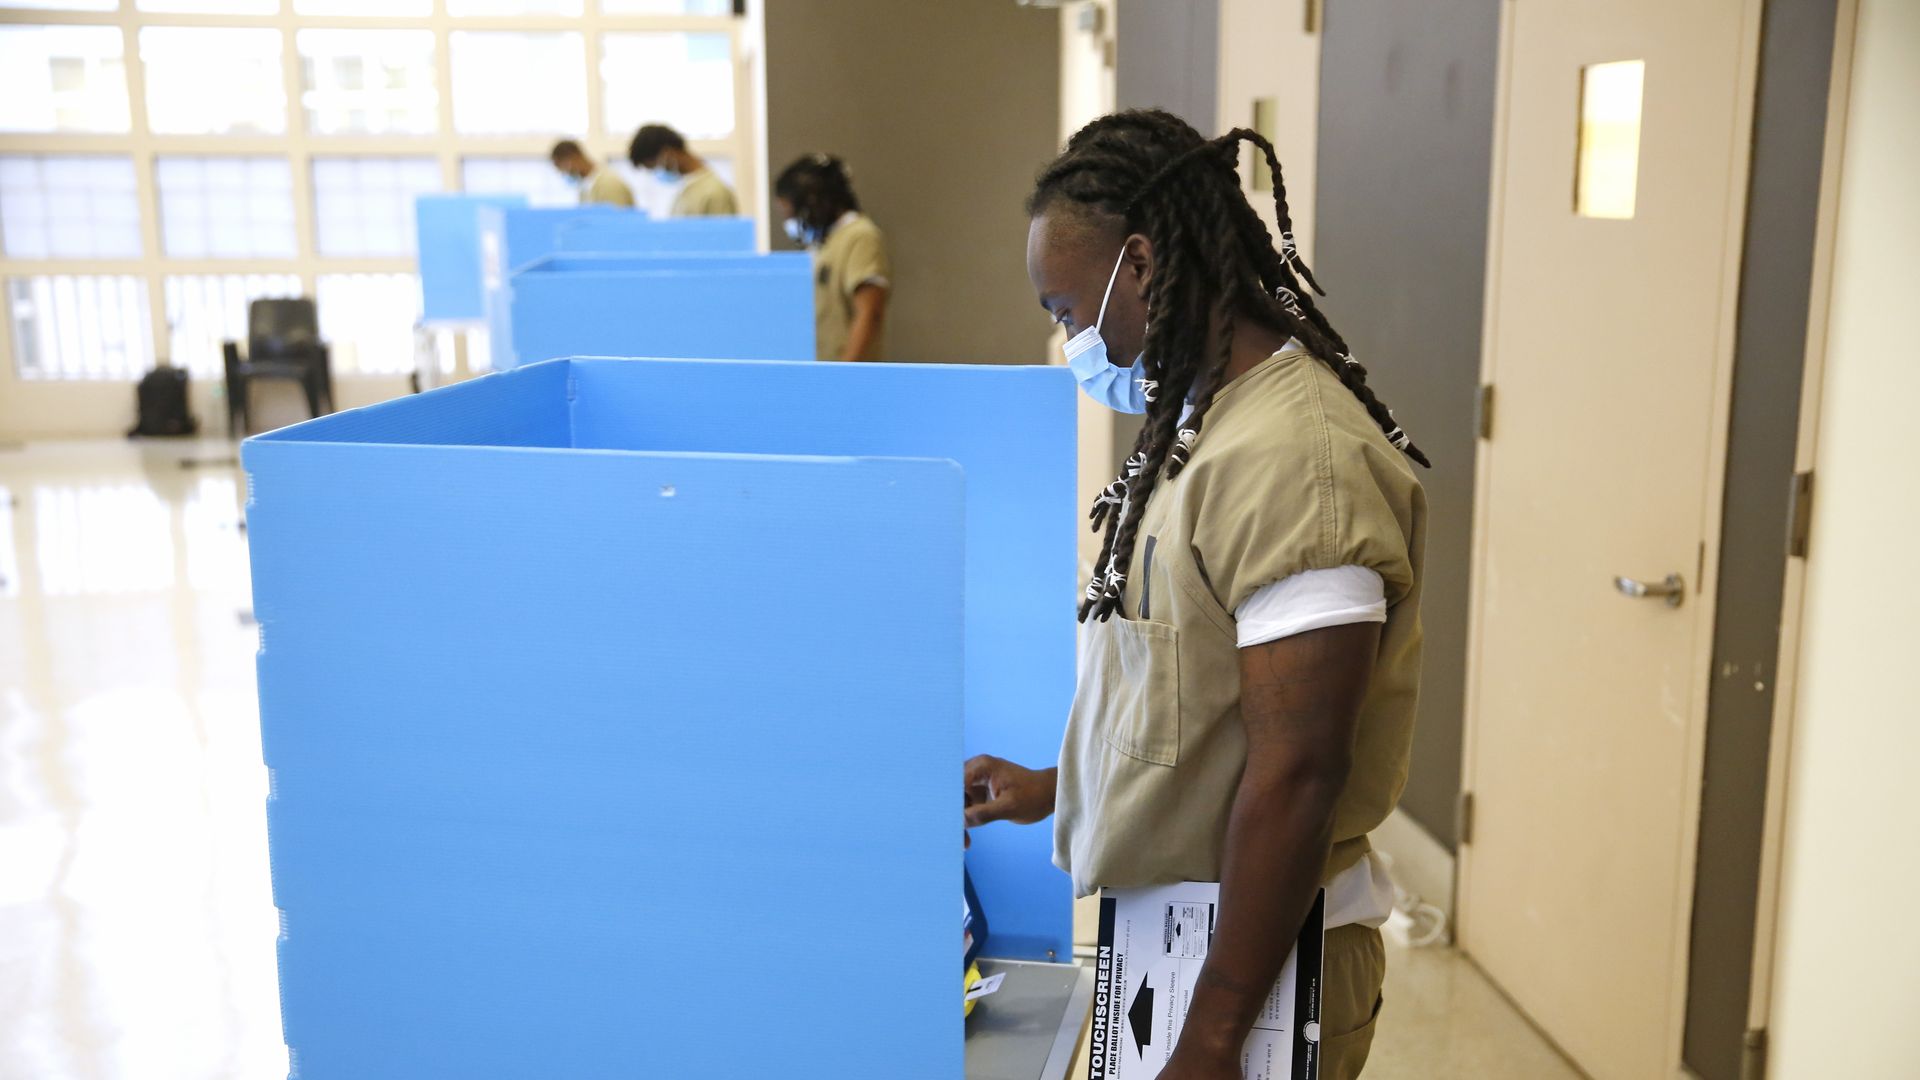 A Cook County jail detainee uses a touch screen to cast his votes at a polling place in the facility set up for early voting on October 17, 2020 in Chicago.